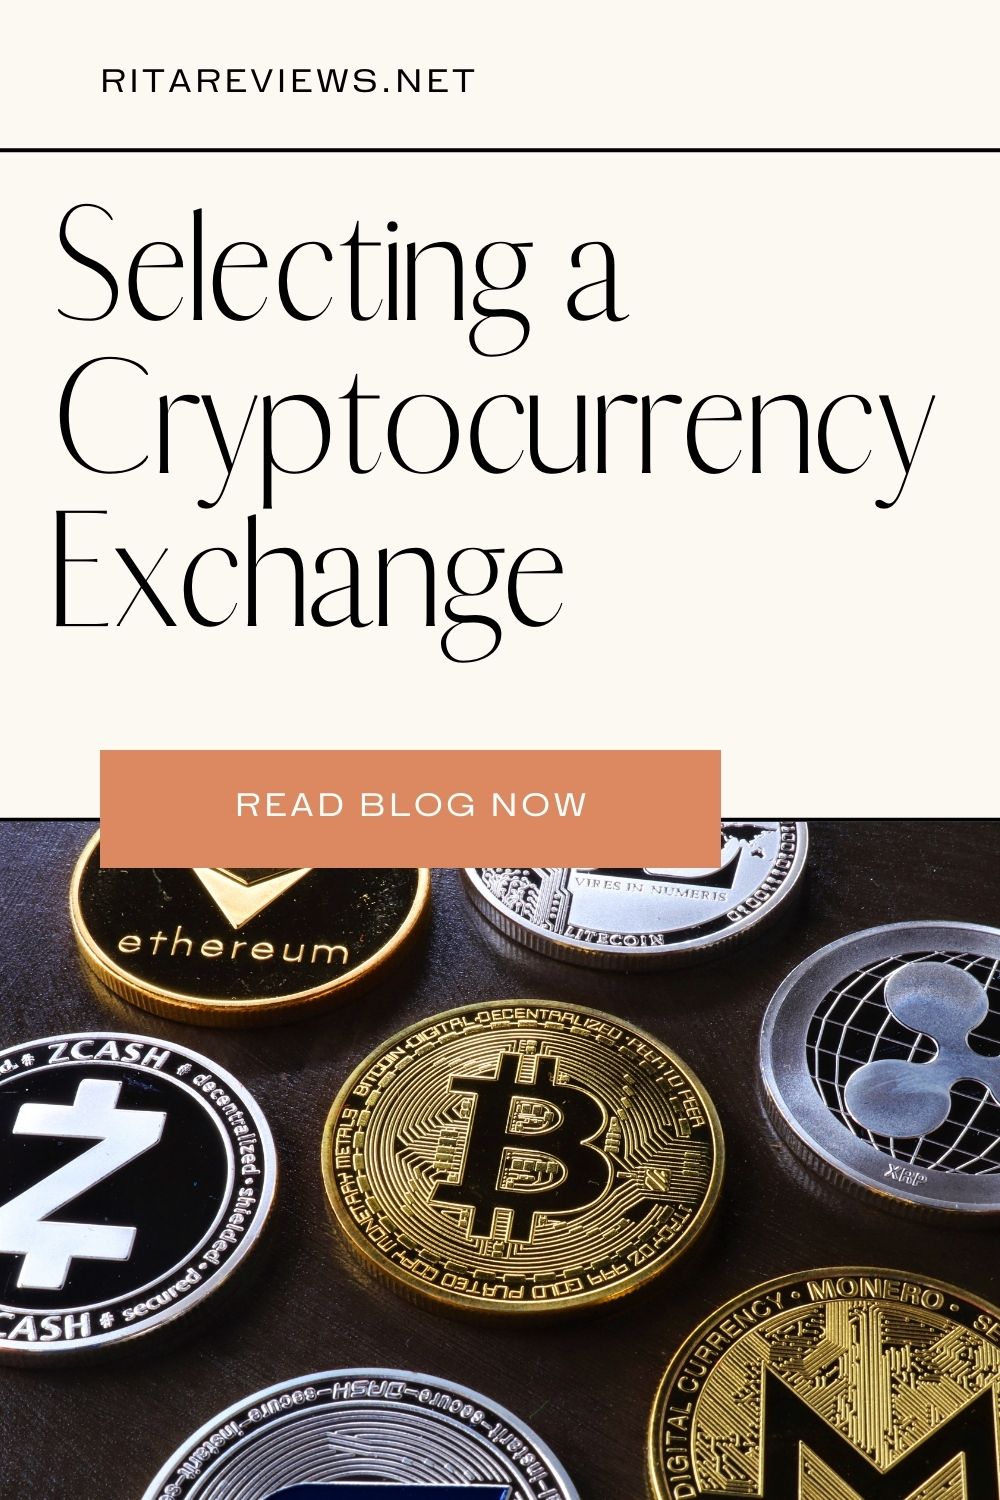 What Are the Top Considerations When Selecting a Cryptocurrency Exchange